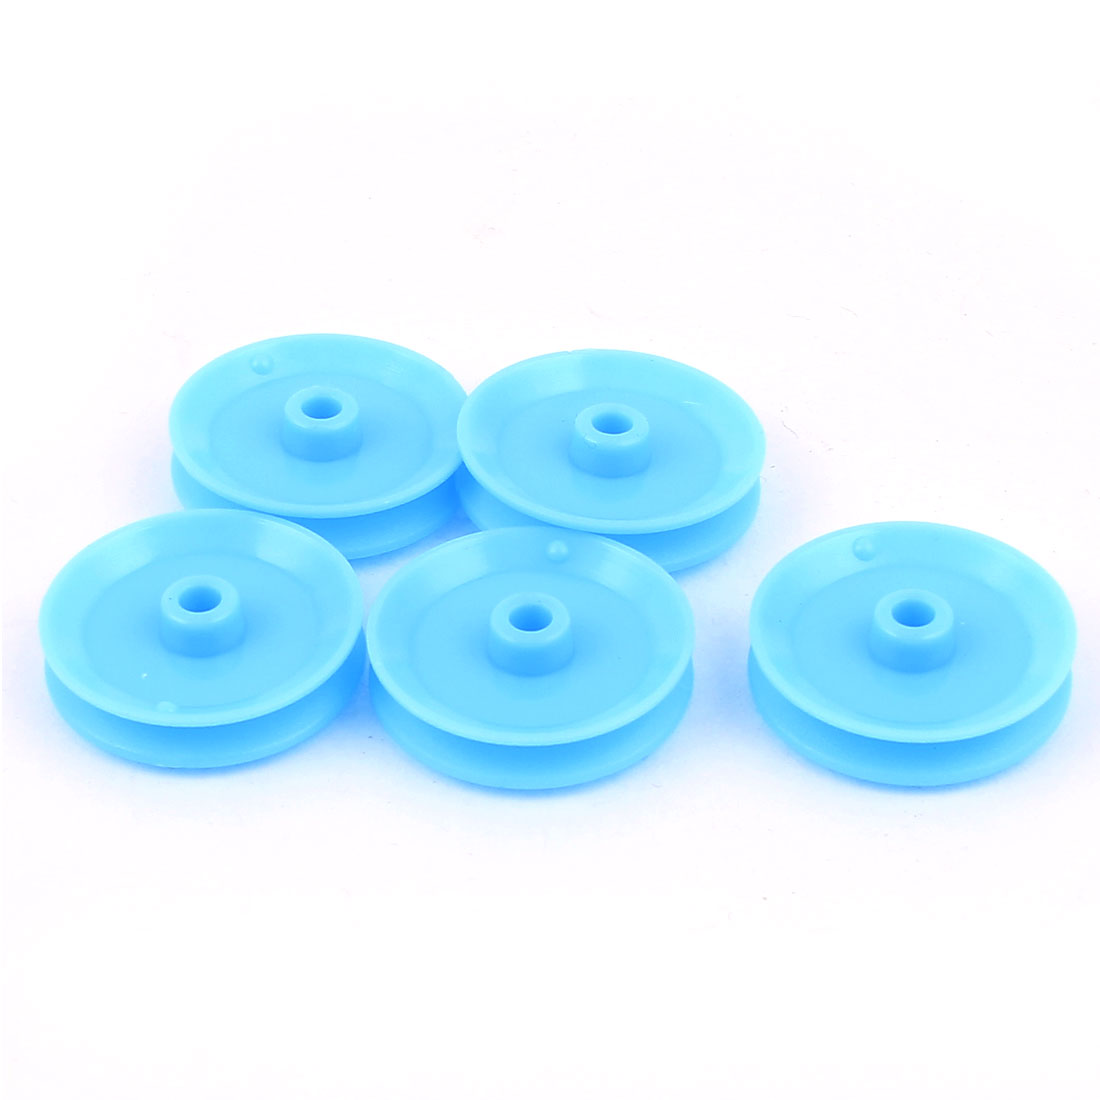 uxcell Uxcell 5 Pcs Plastic 29mm Diameter 5.8mm Thickness DIY Gear Band Pulley Blue